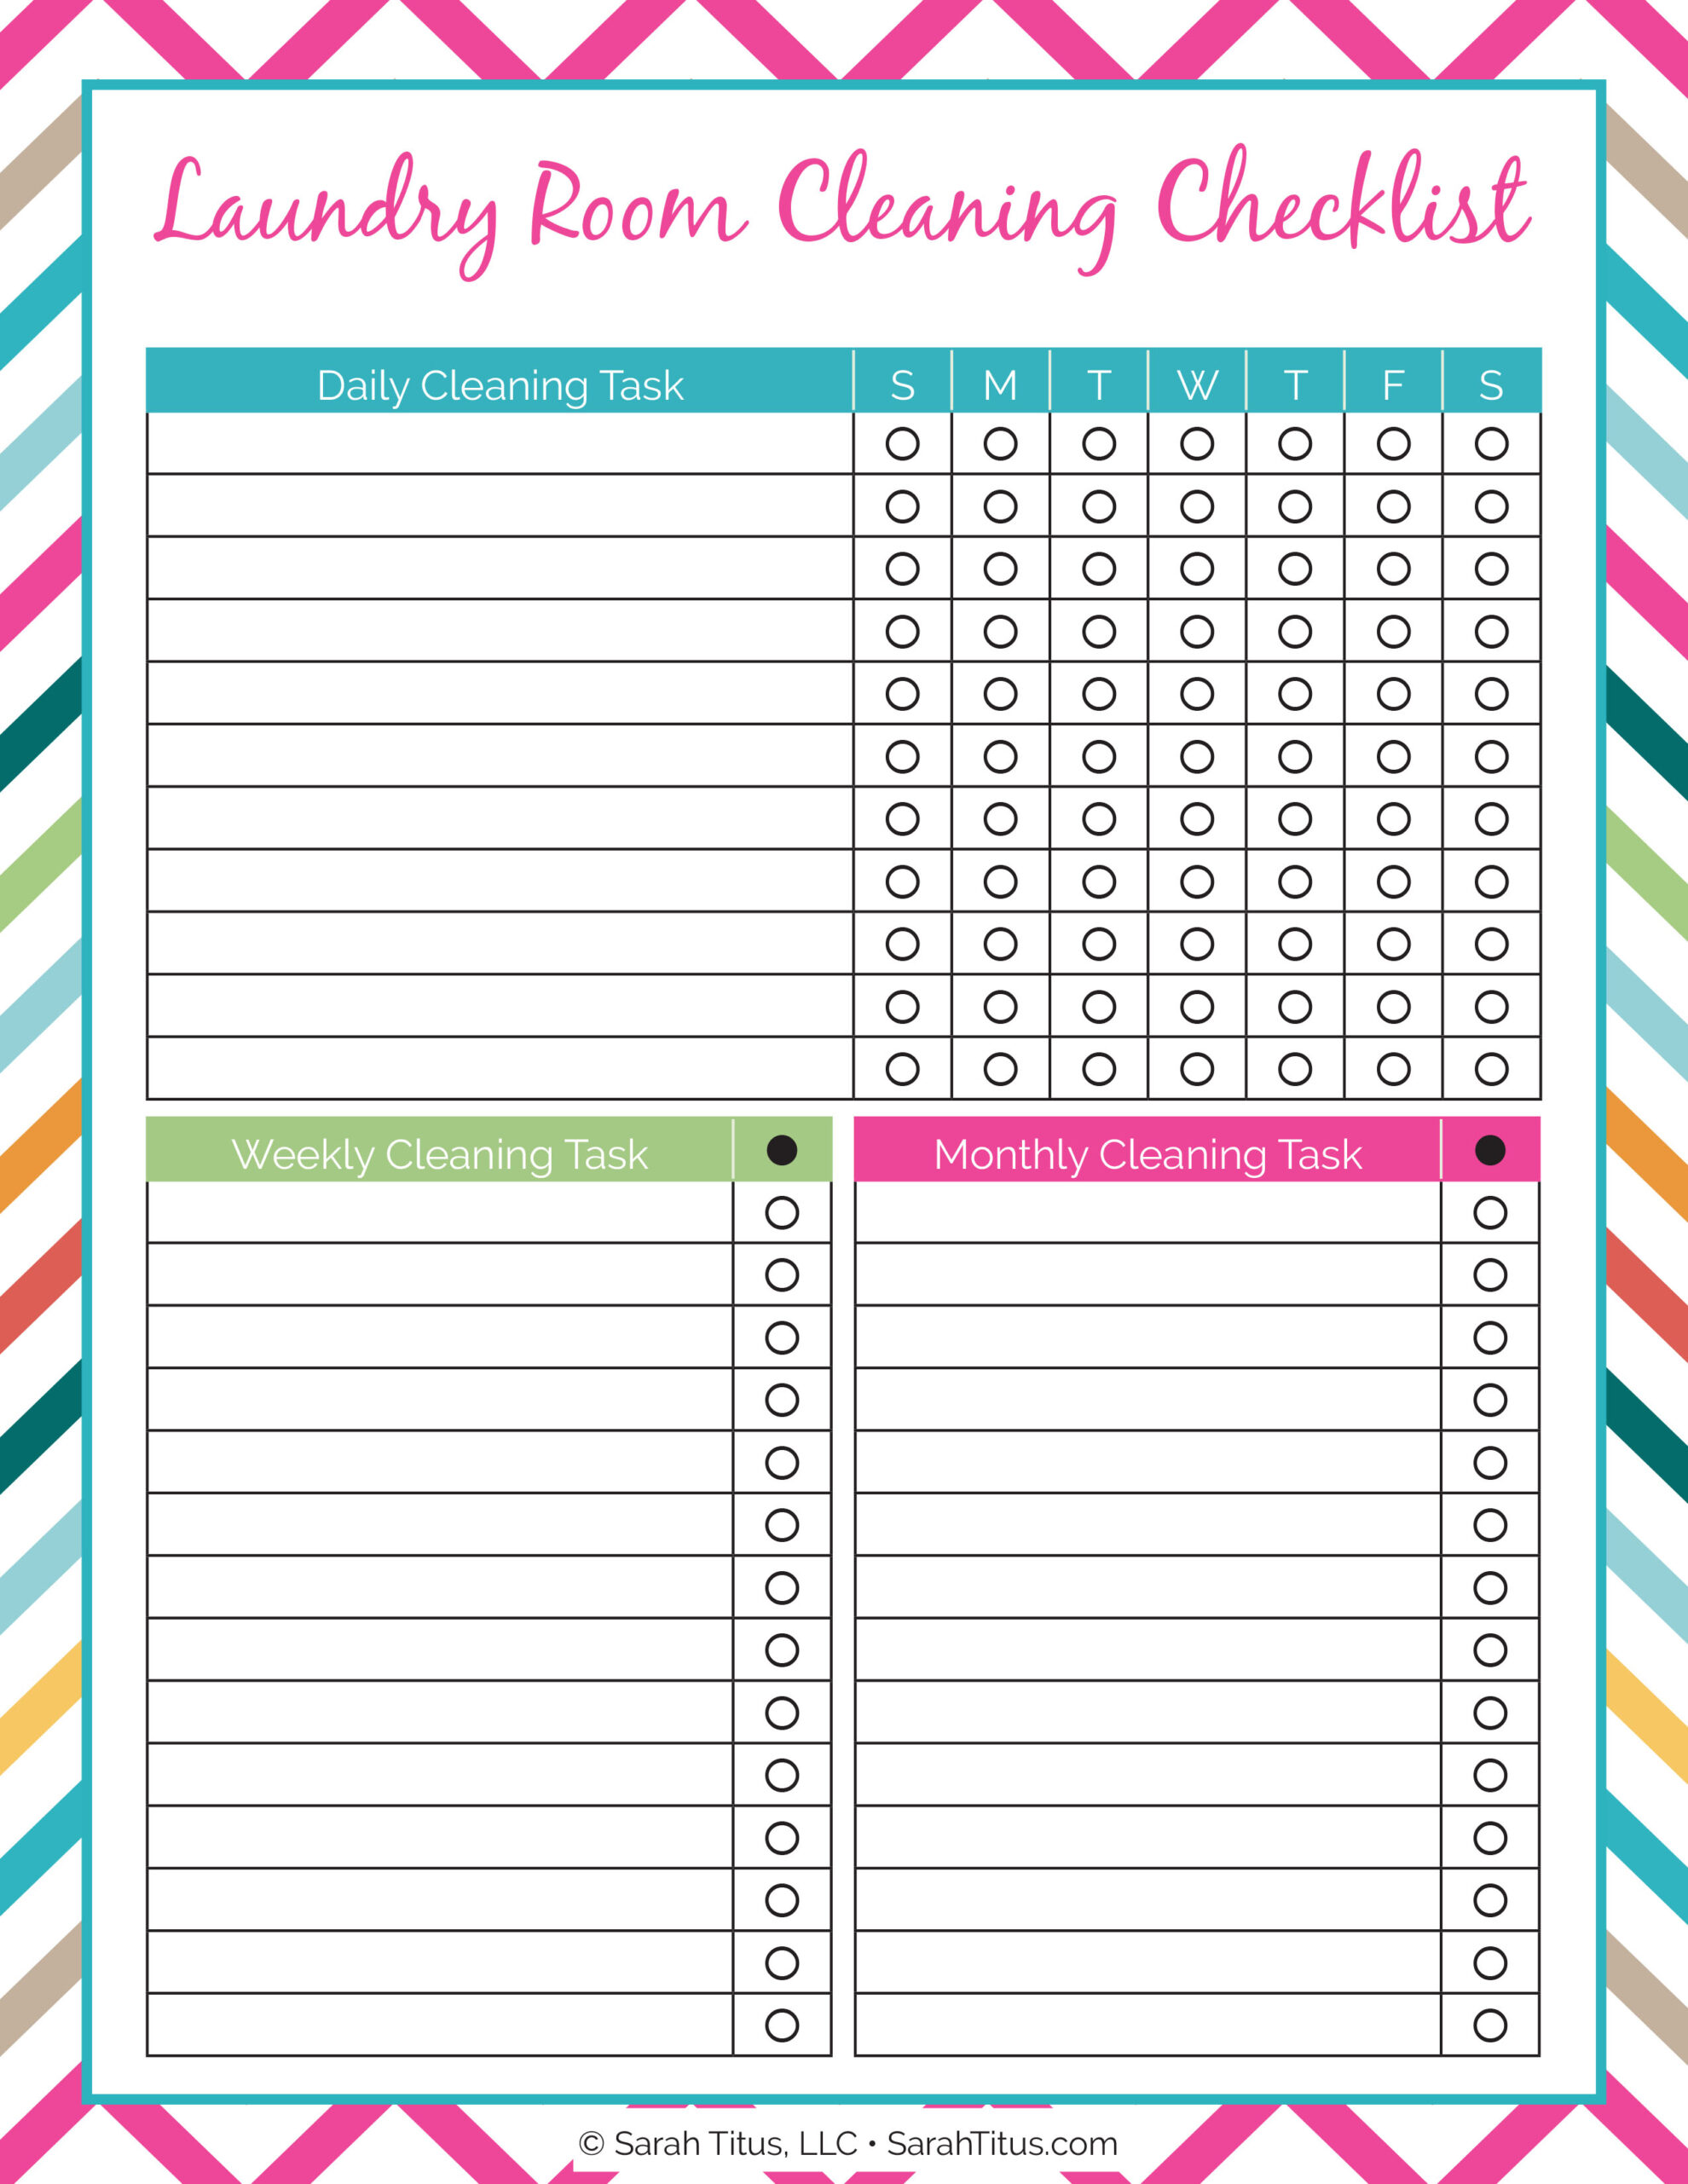 cleaning-binder-laundry-room-cleaning-checklist-sarah-titus